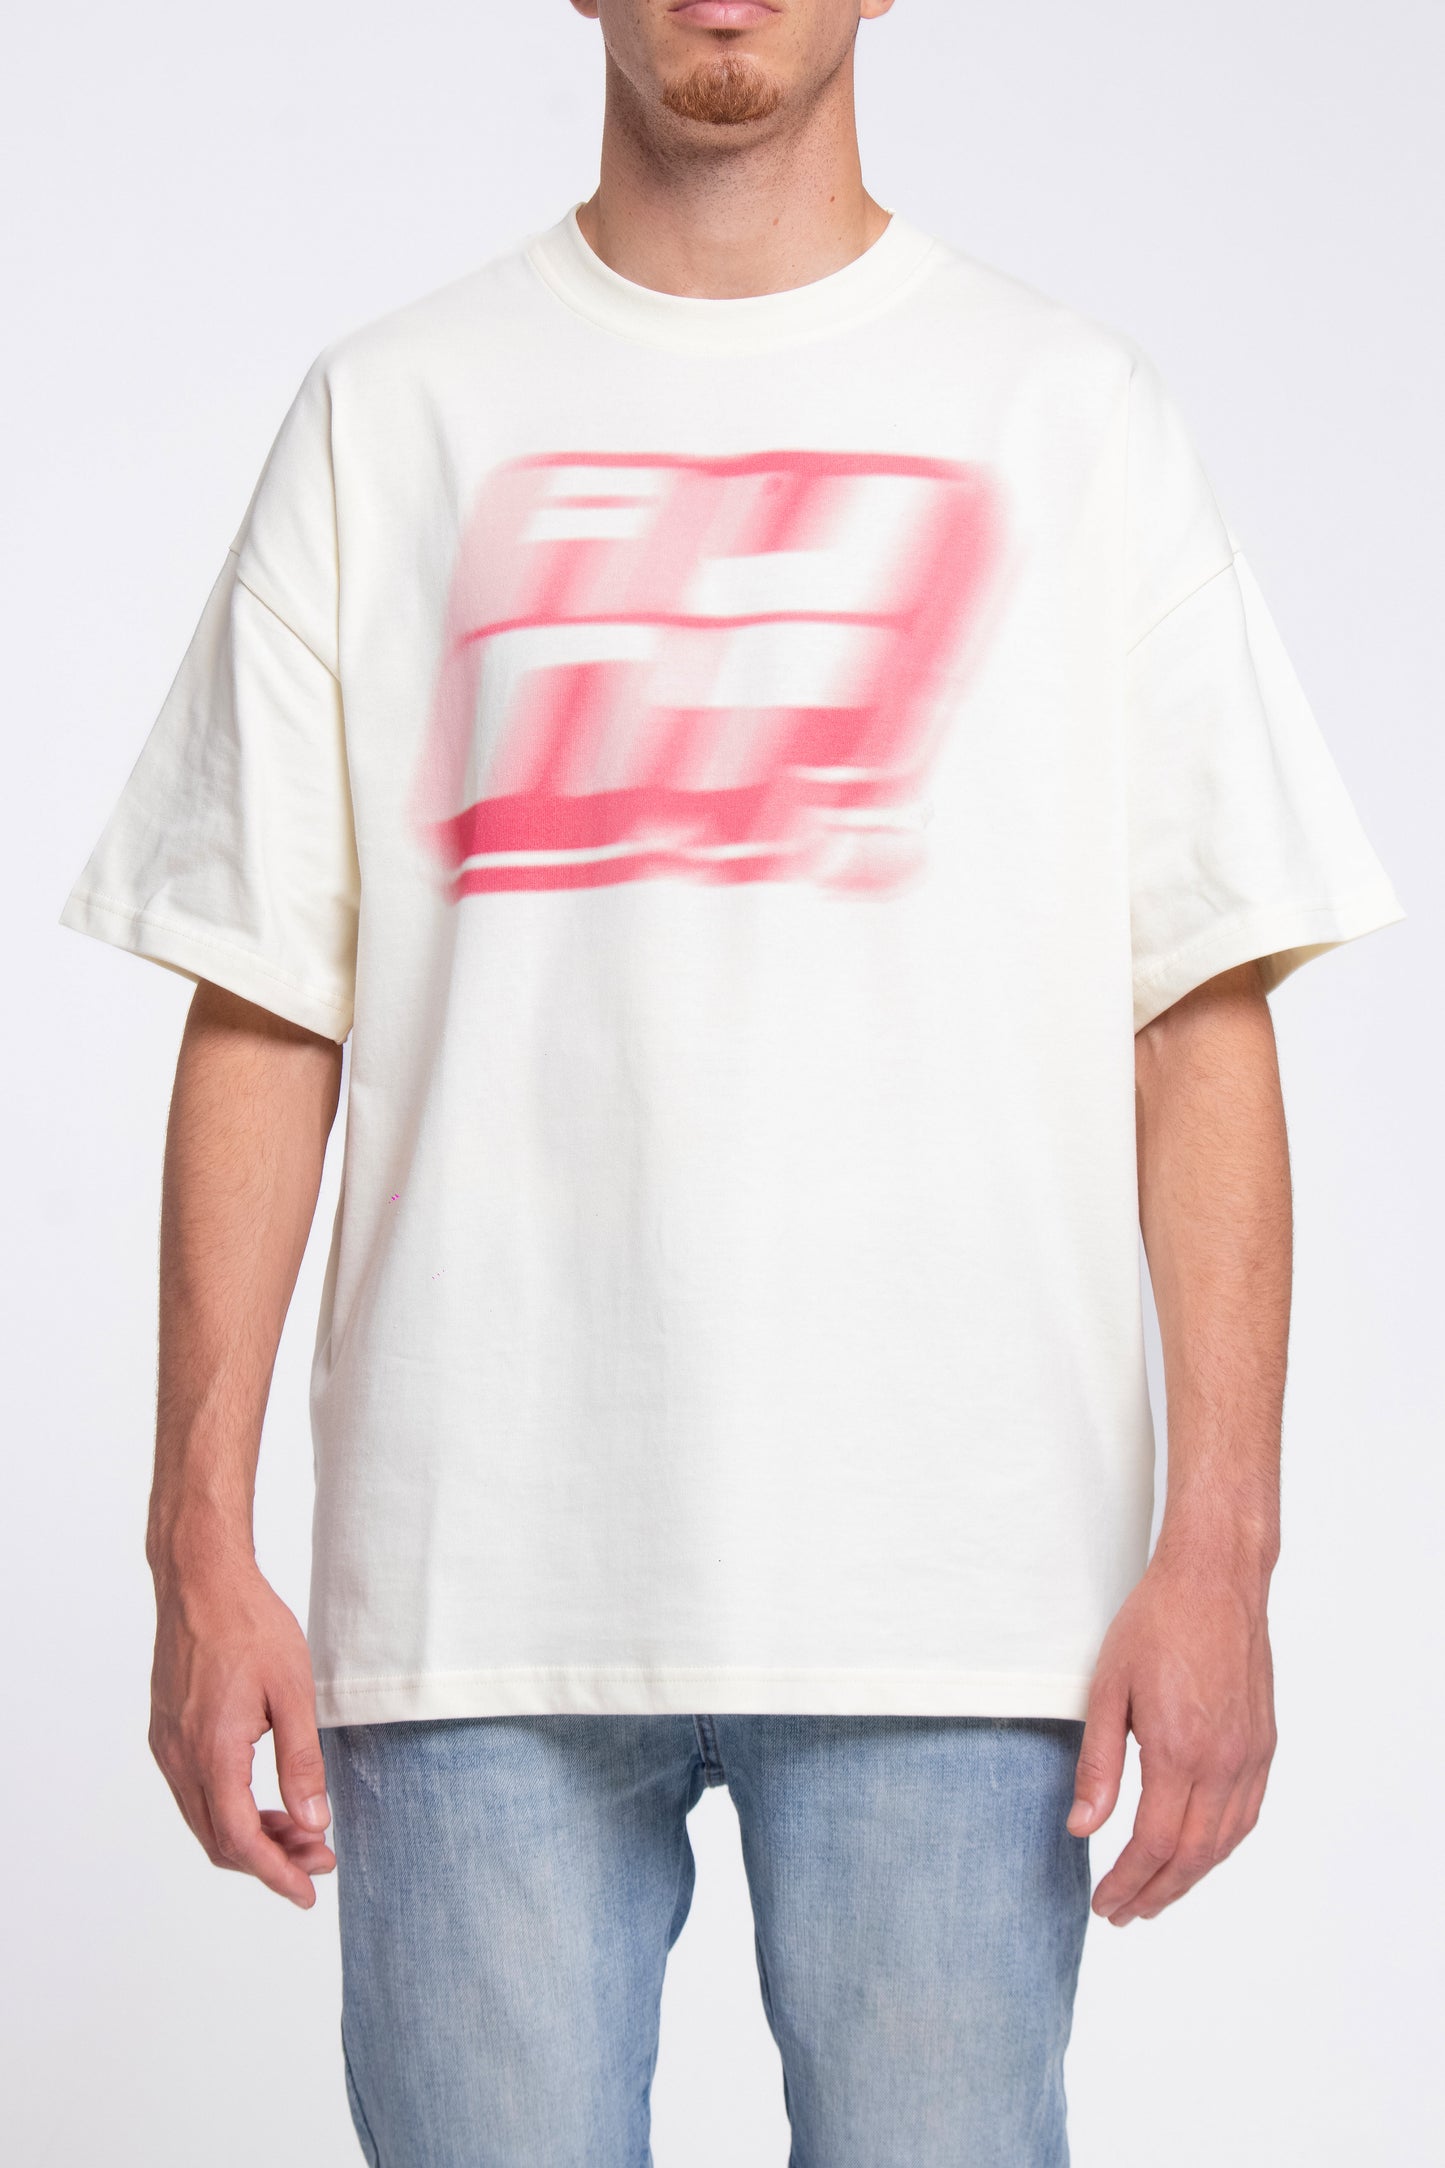 AUNT FADED PINK LOGO TEE